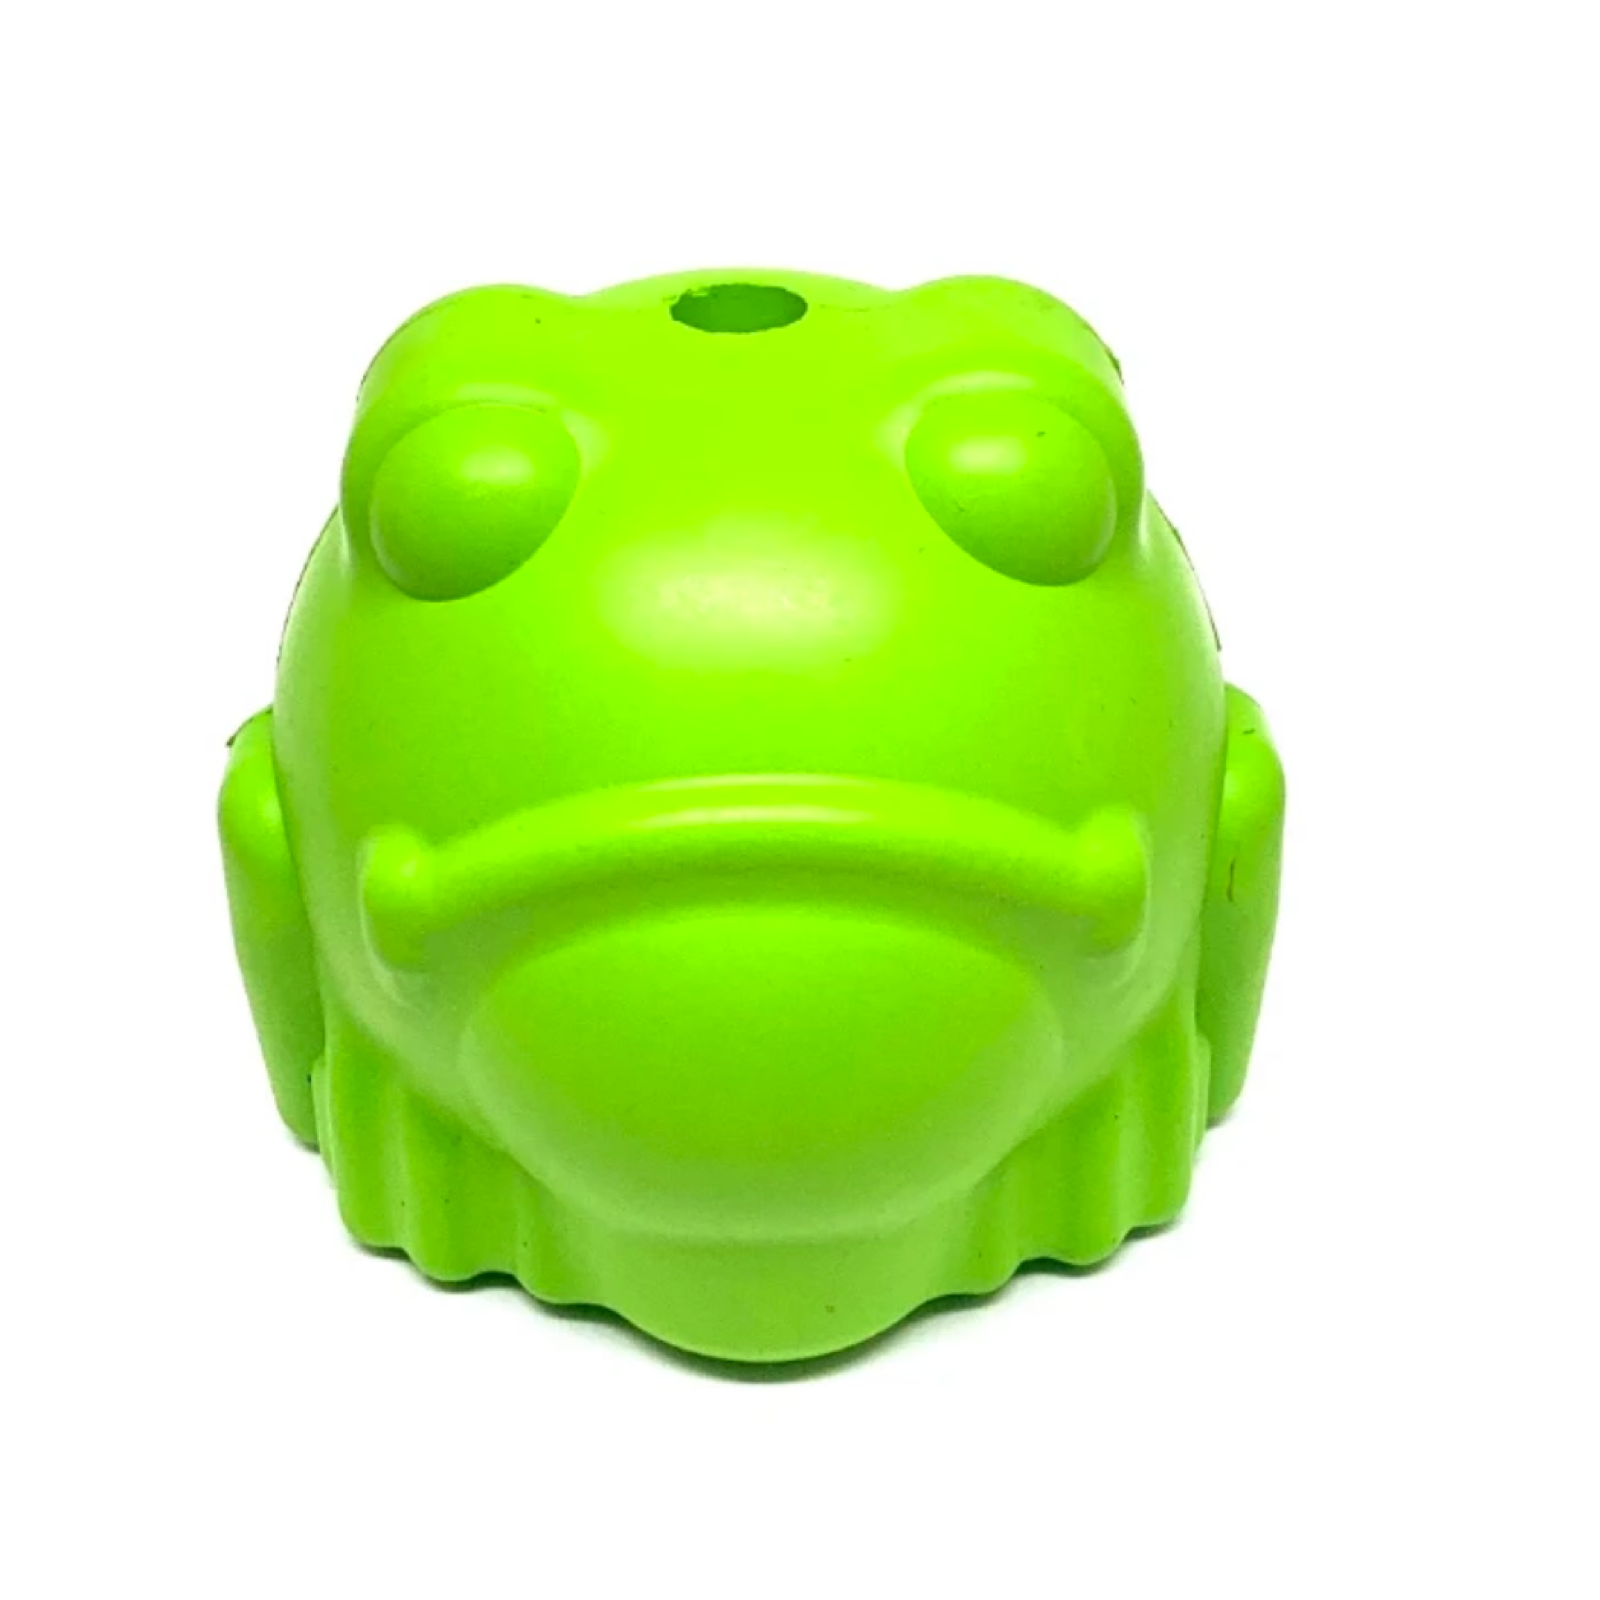 ROVER PET PRODUCTS - Bullfrog Slow Feeder Toy